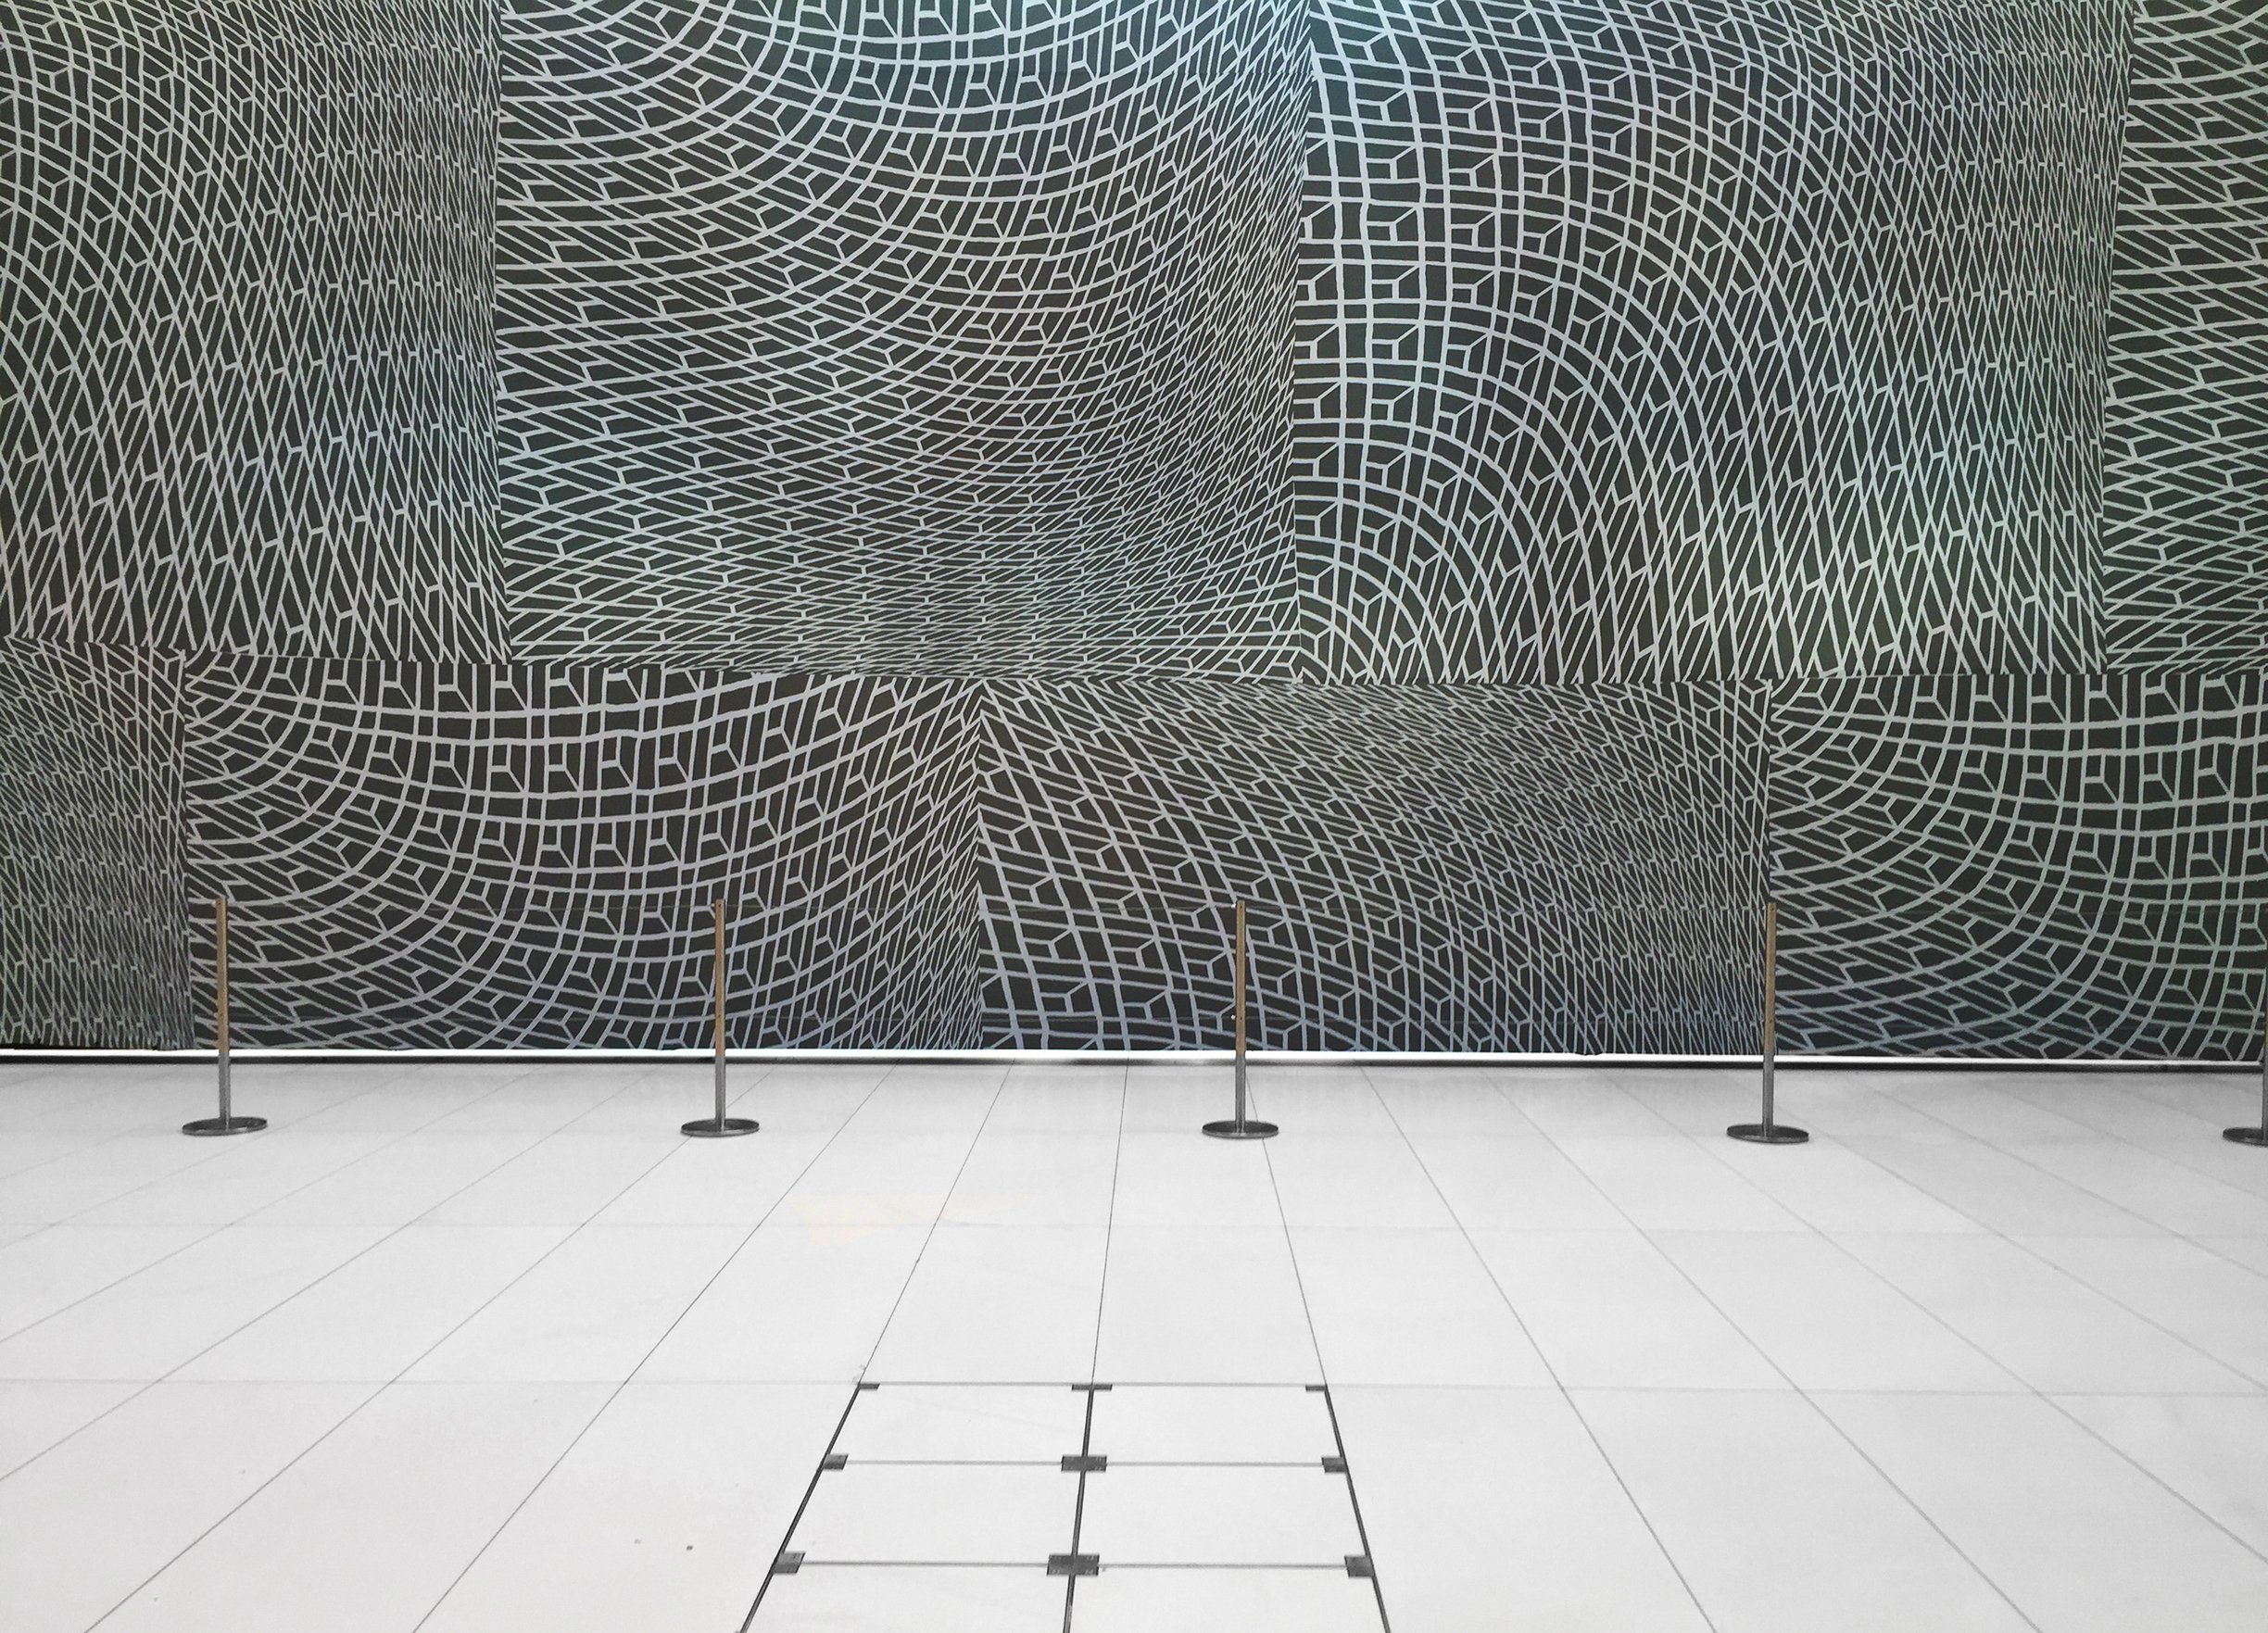 Installation at the Occulus at World Trade Center